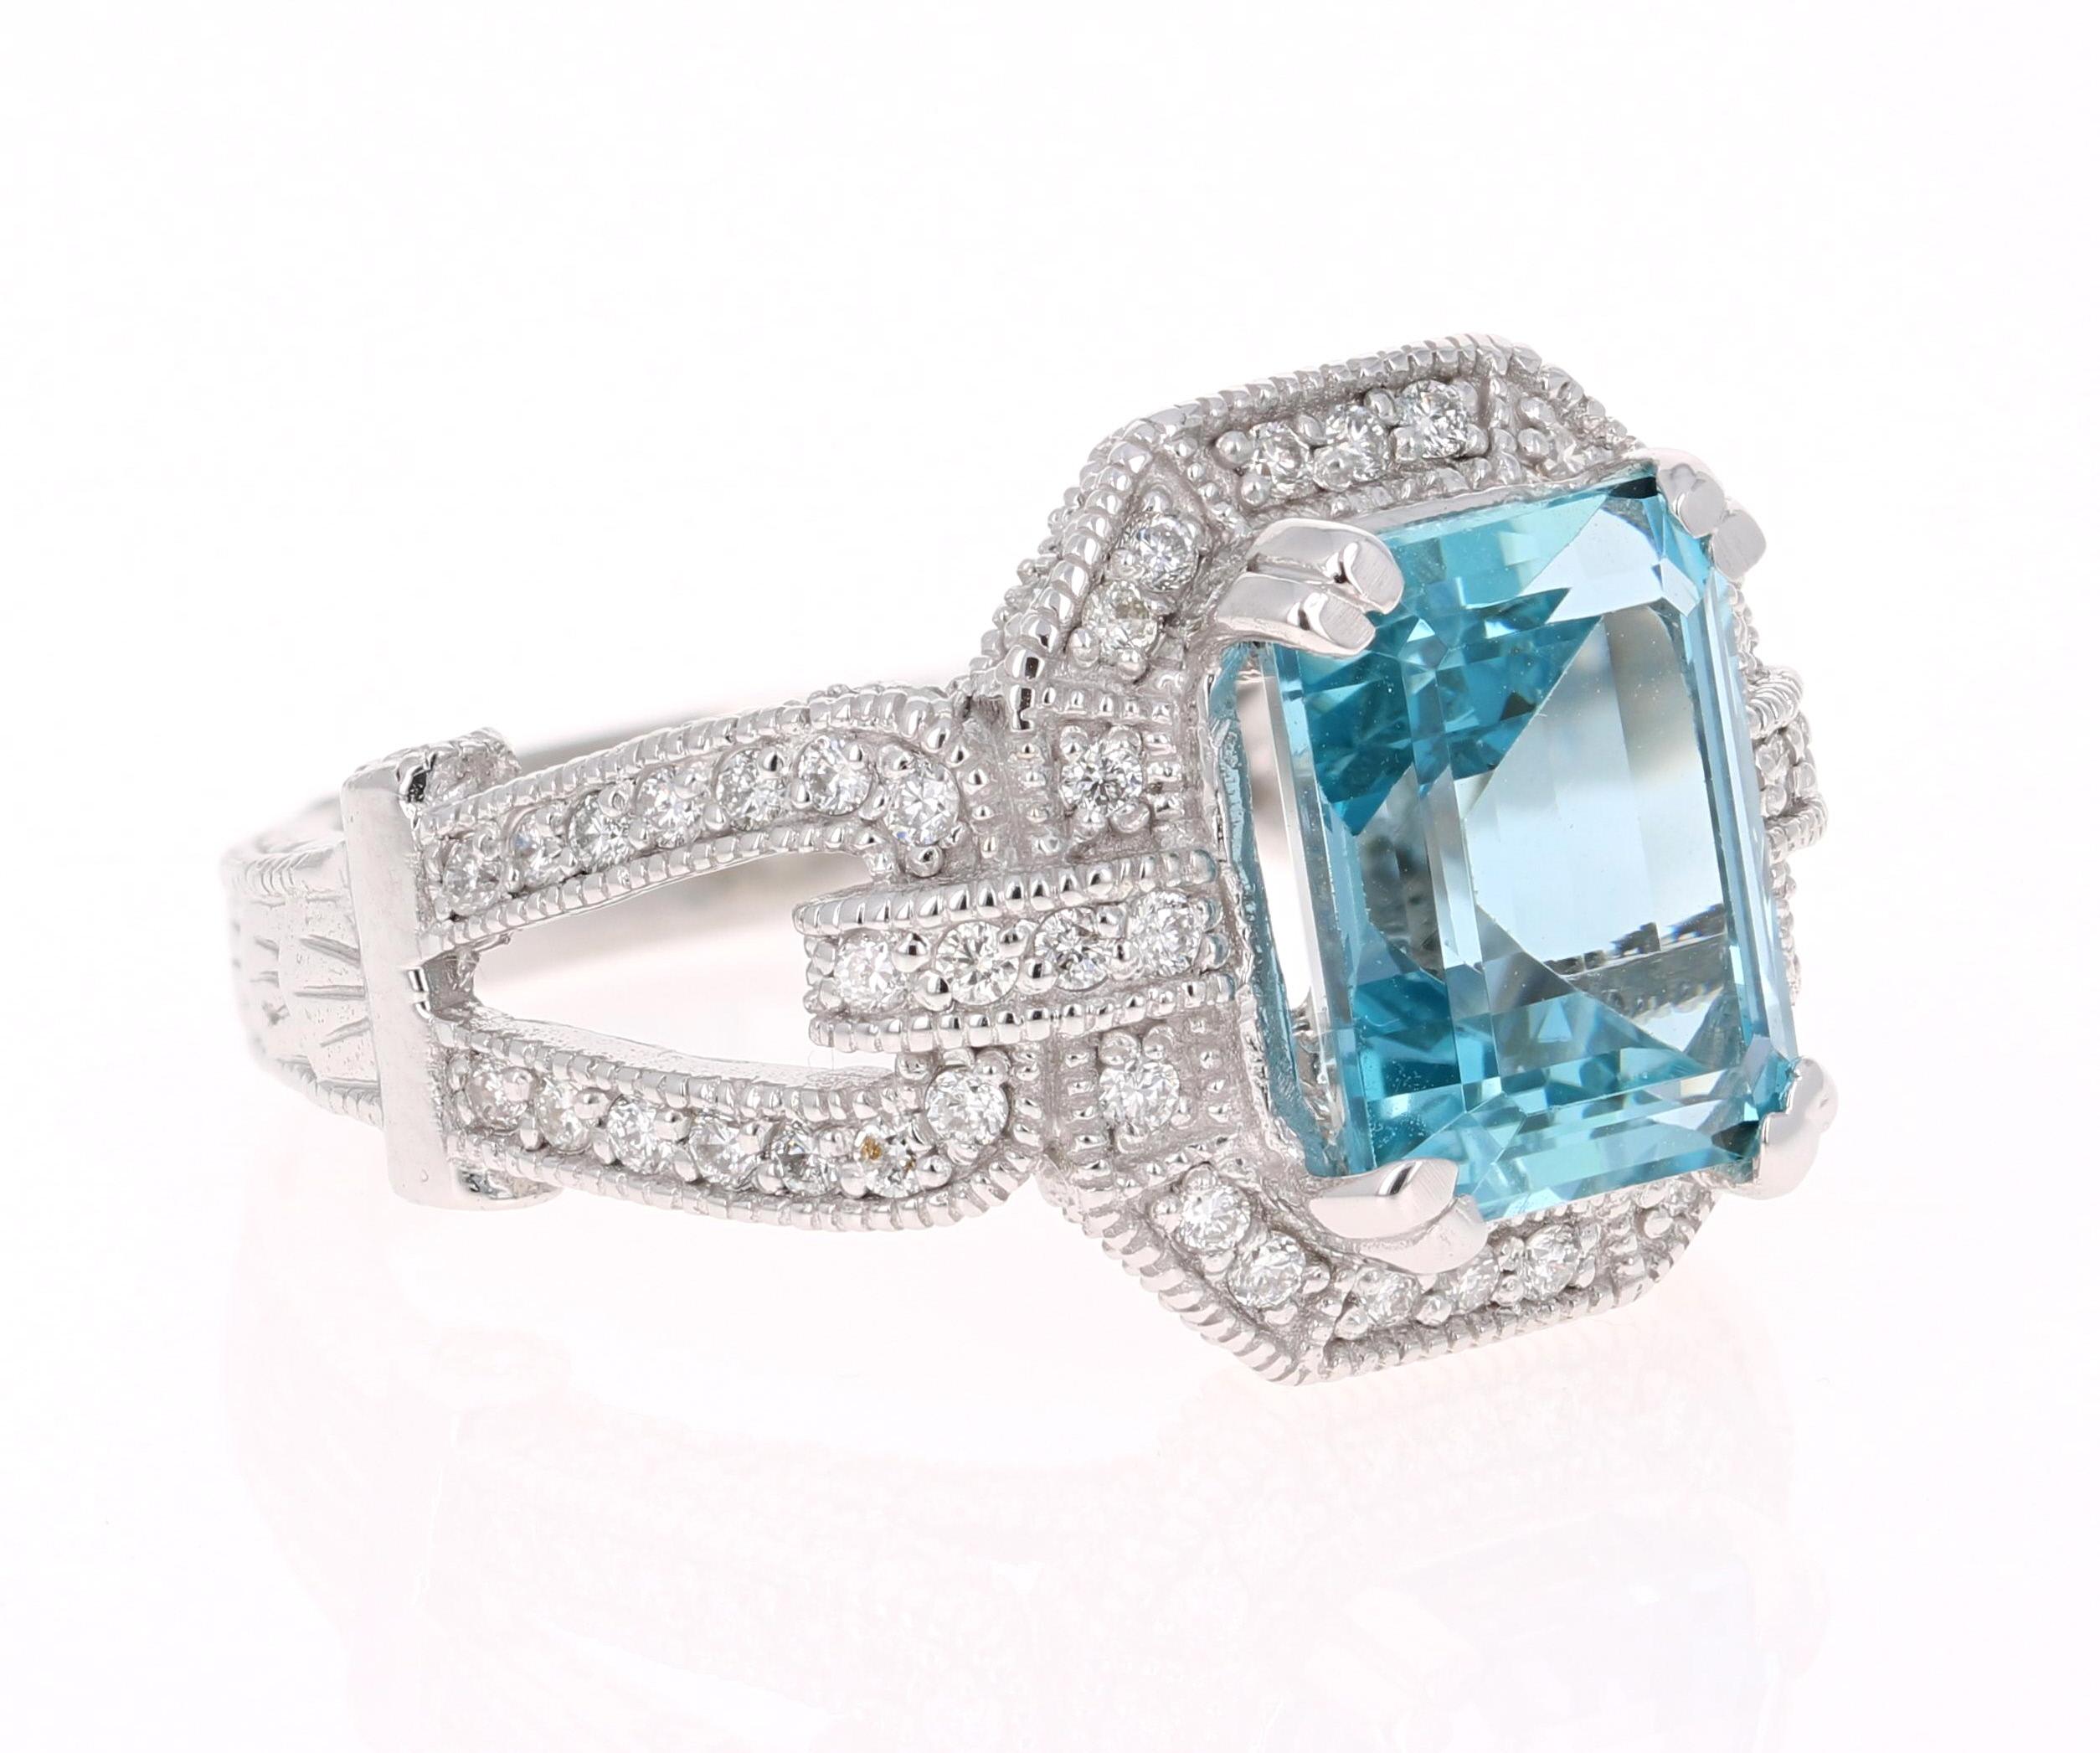 This ring has a beautiful 4.78 Carat Emerald Cut Aquamarine set in the center of the ring and is surrounded by Natural Round Cut Diamonds that weigh 1.27 carat (Clarity: VS2, Color: F). The total carat weight of this ring is 6.05 carats. 
The